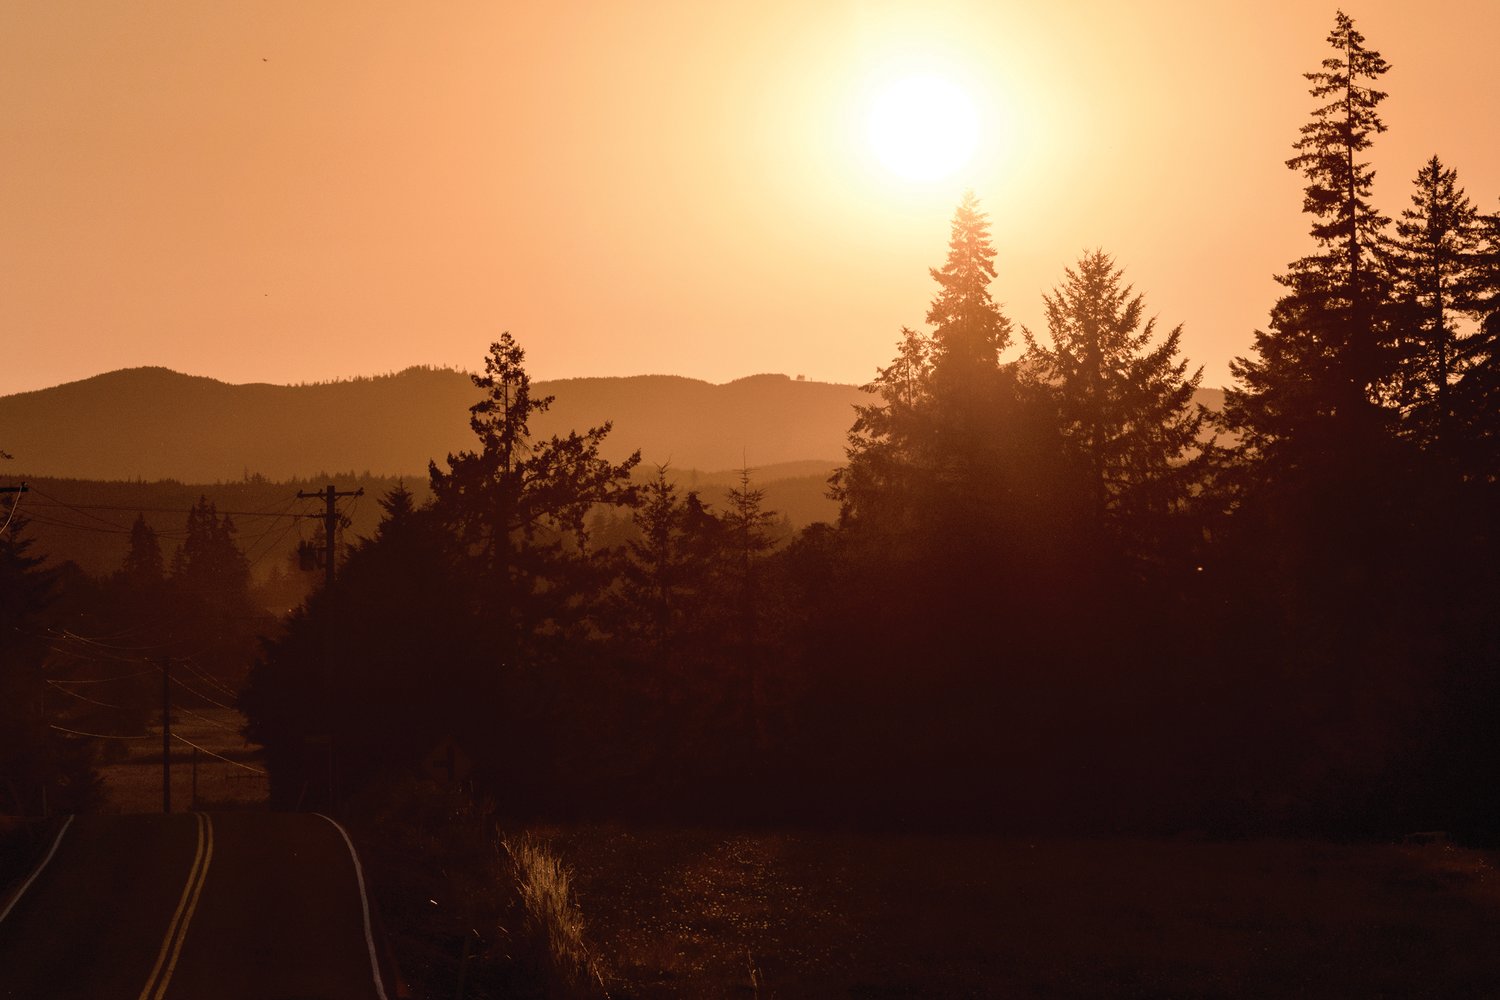 The sun sets over the Willapa Hills as seen from Twin Oaks Road Wednesday evening.